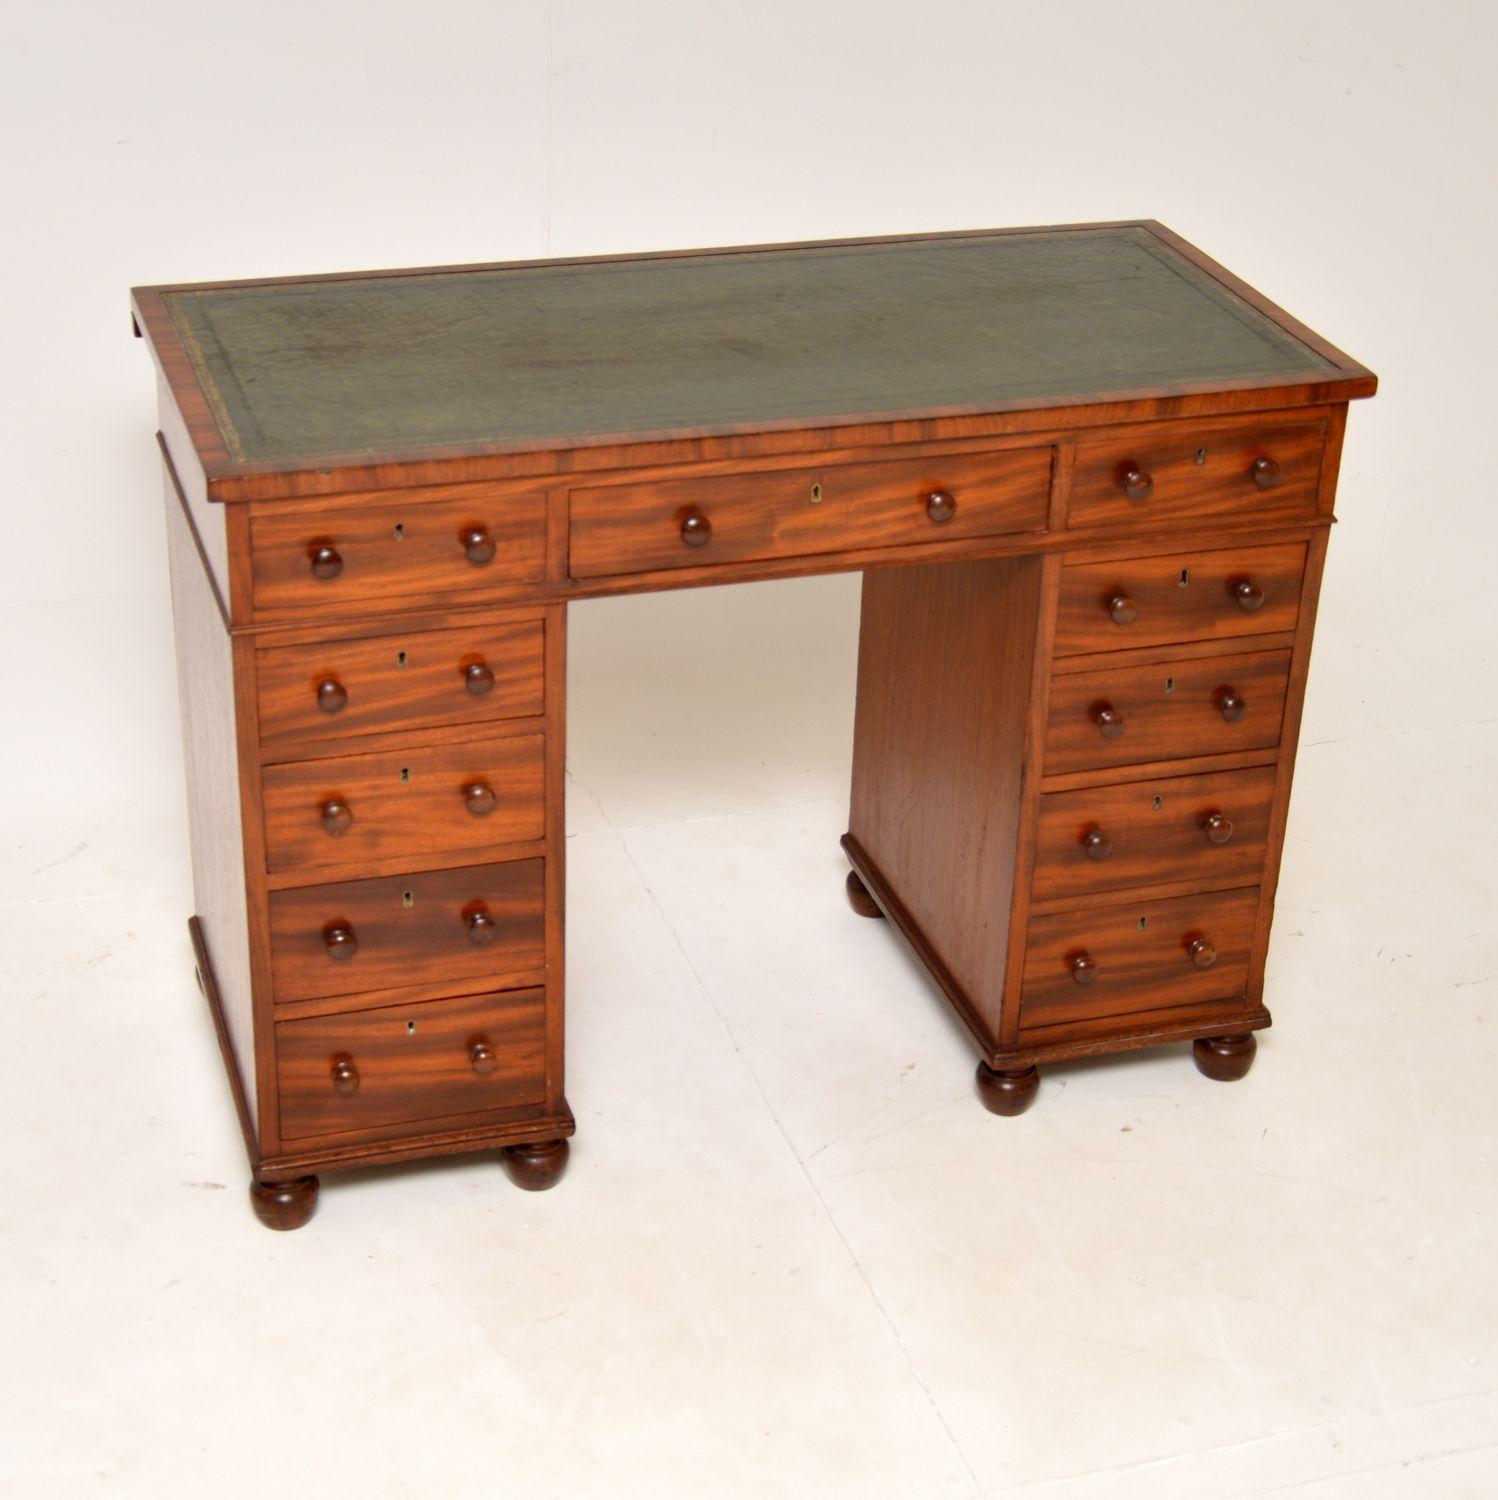 A beautiful and very unusual antique early Victorian architects desk. This was made in England, and I would date it from the 1840-1860 period.

It appears as a regular pedestal desk with a gold tooled leather top, turned handles and bun feet.